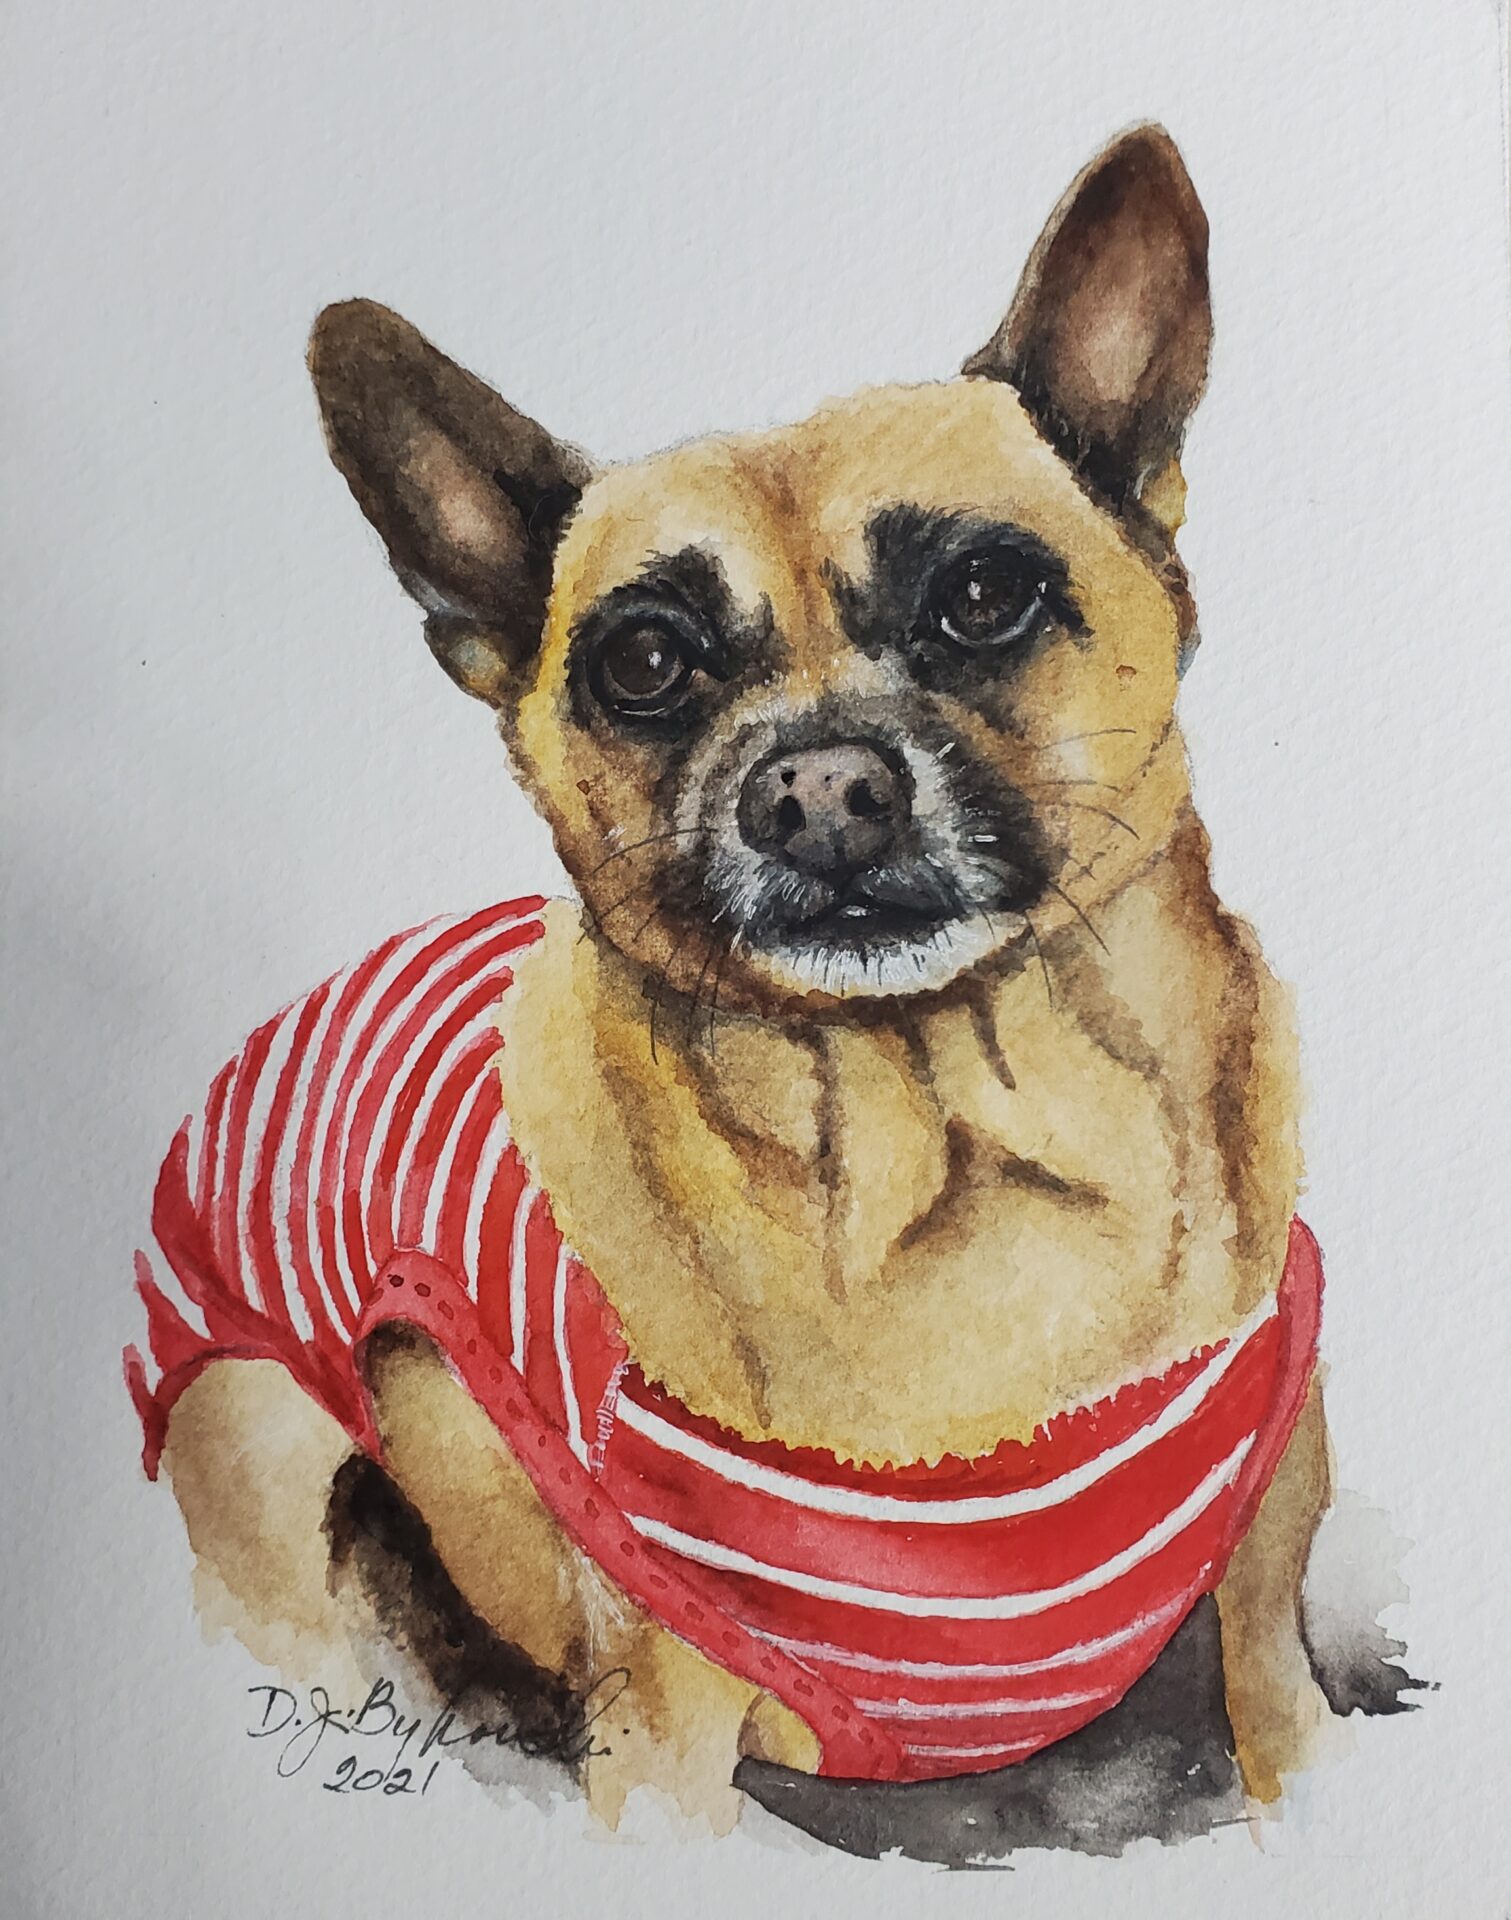 Painting art of a dog wearing a red and white stripes shirt